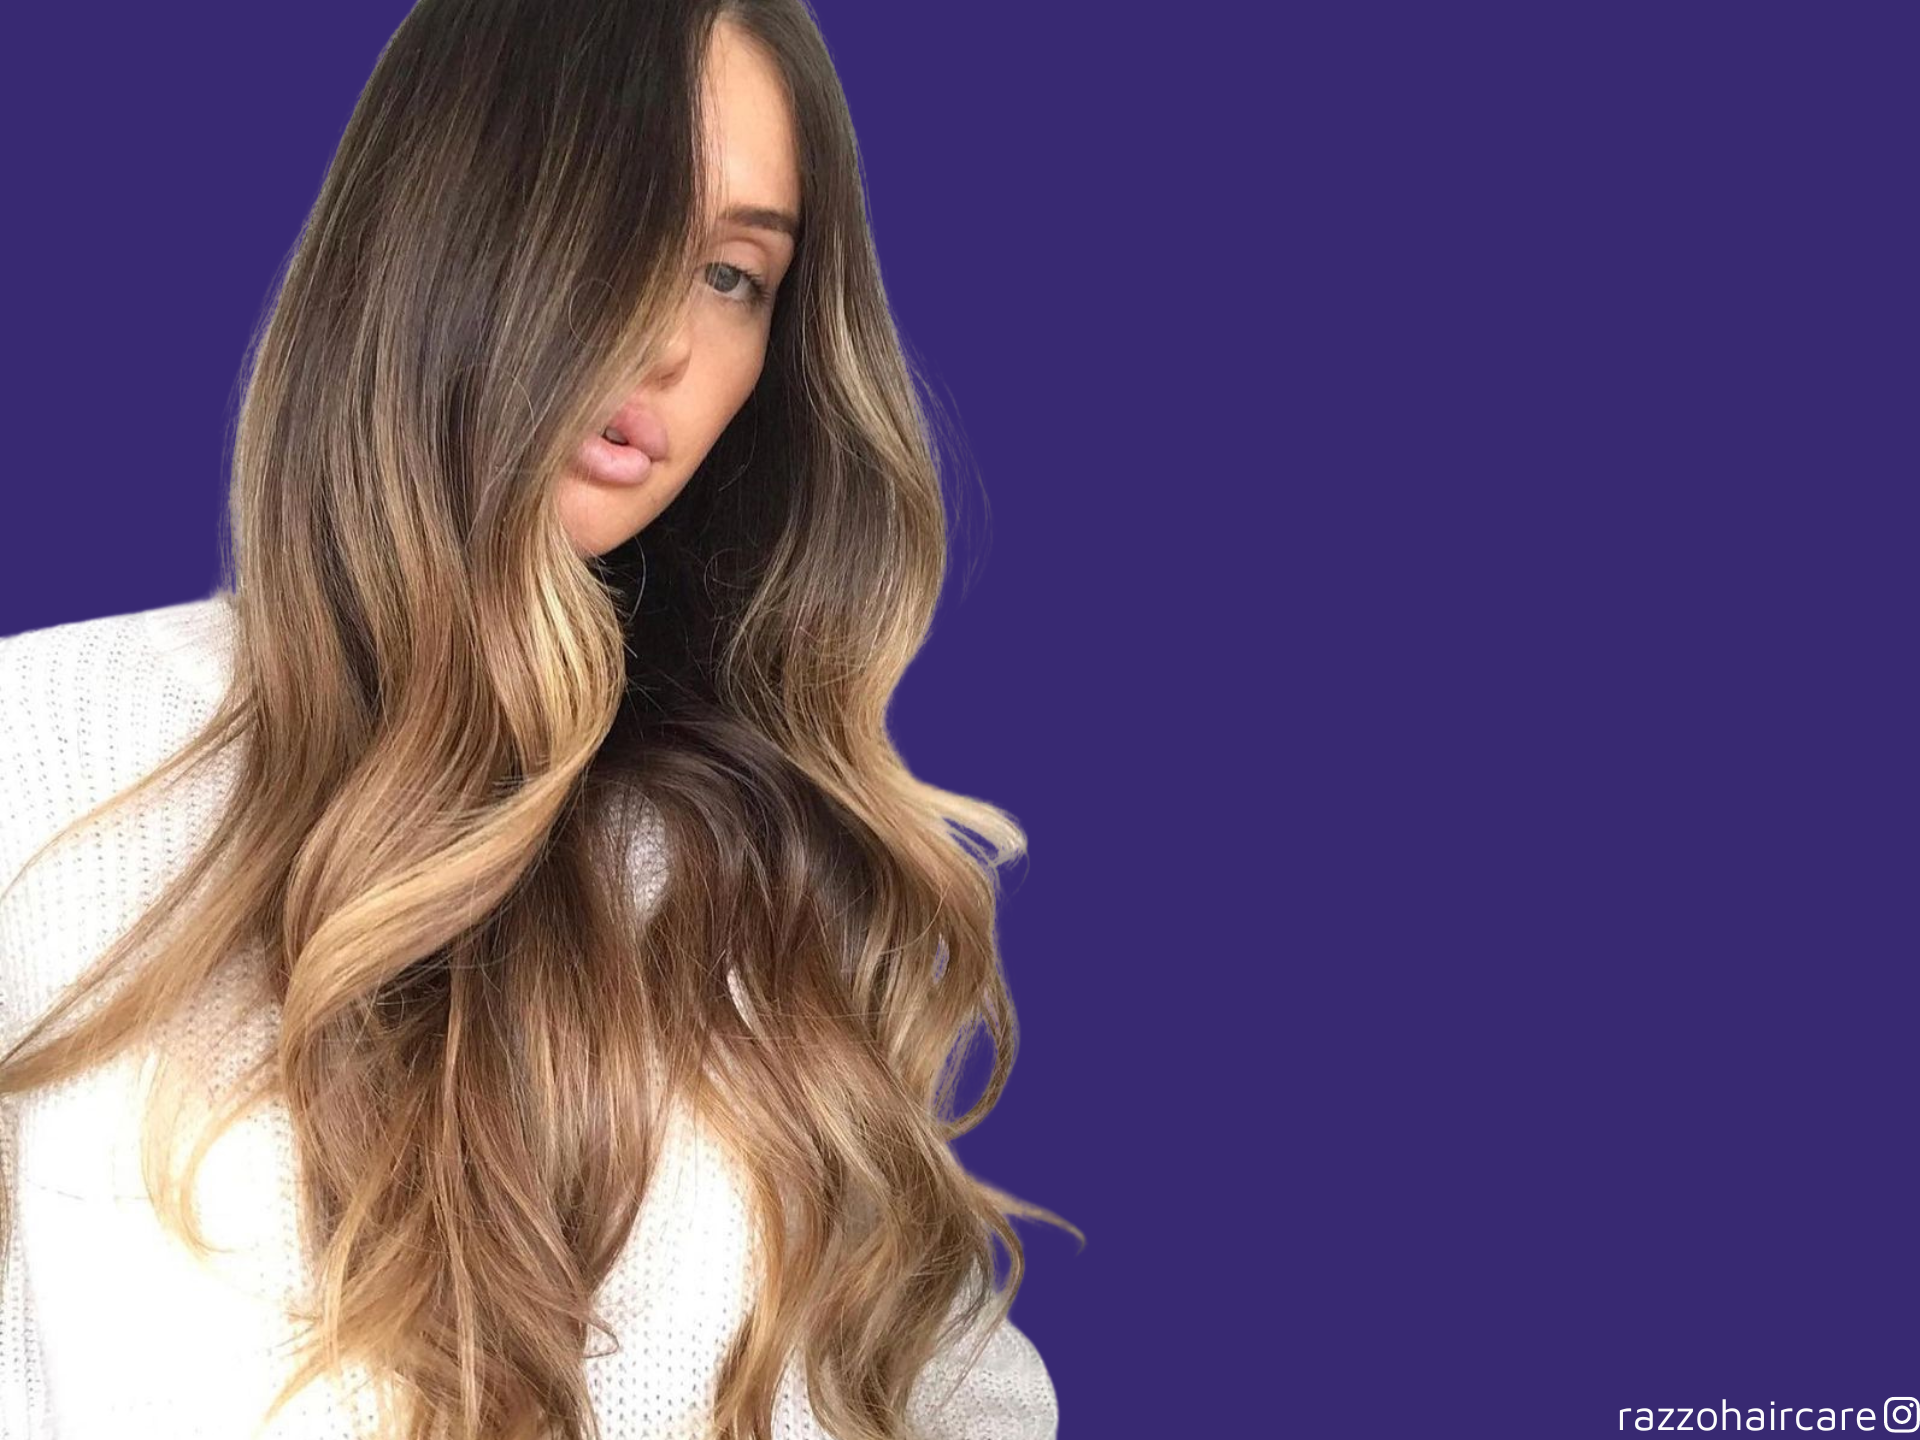 20 Honey Highlights On Brown Hair Ideas For Your Next Salon Visit